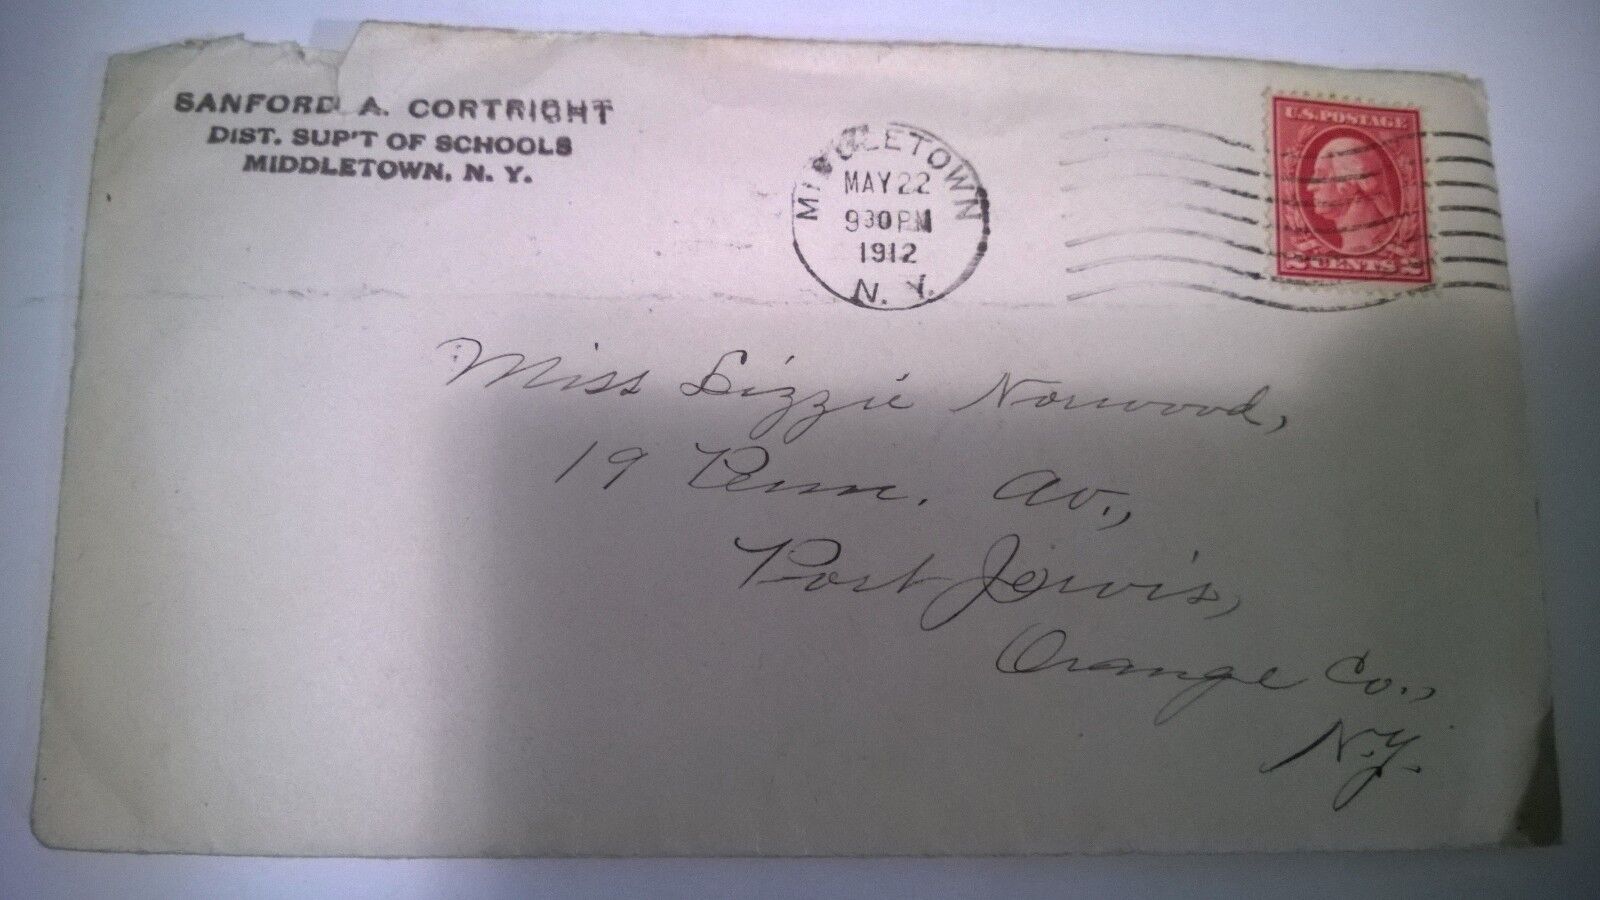 ANTIQUE Official Handwritten Letter Correspondence With Envelope & Return Re1912